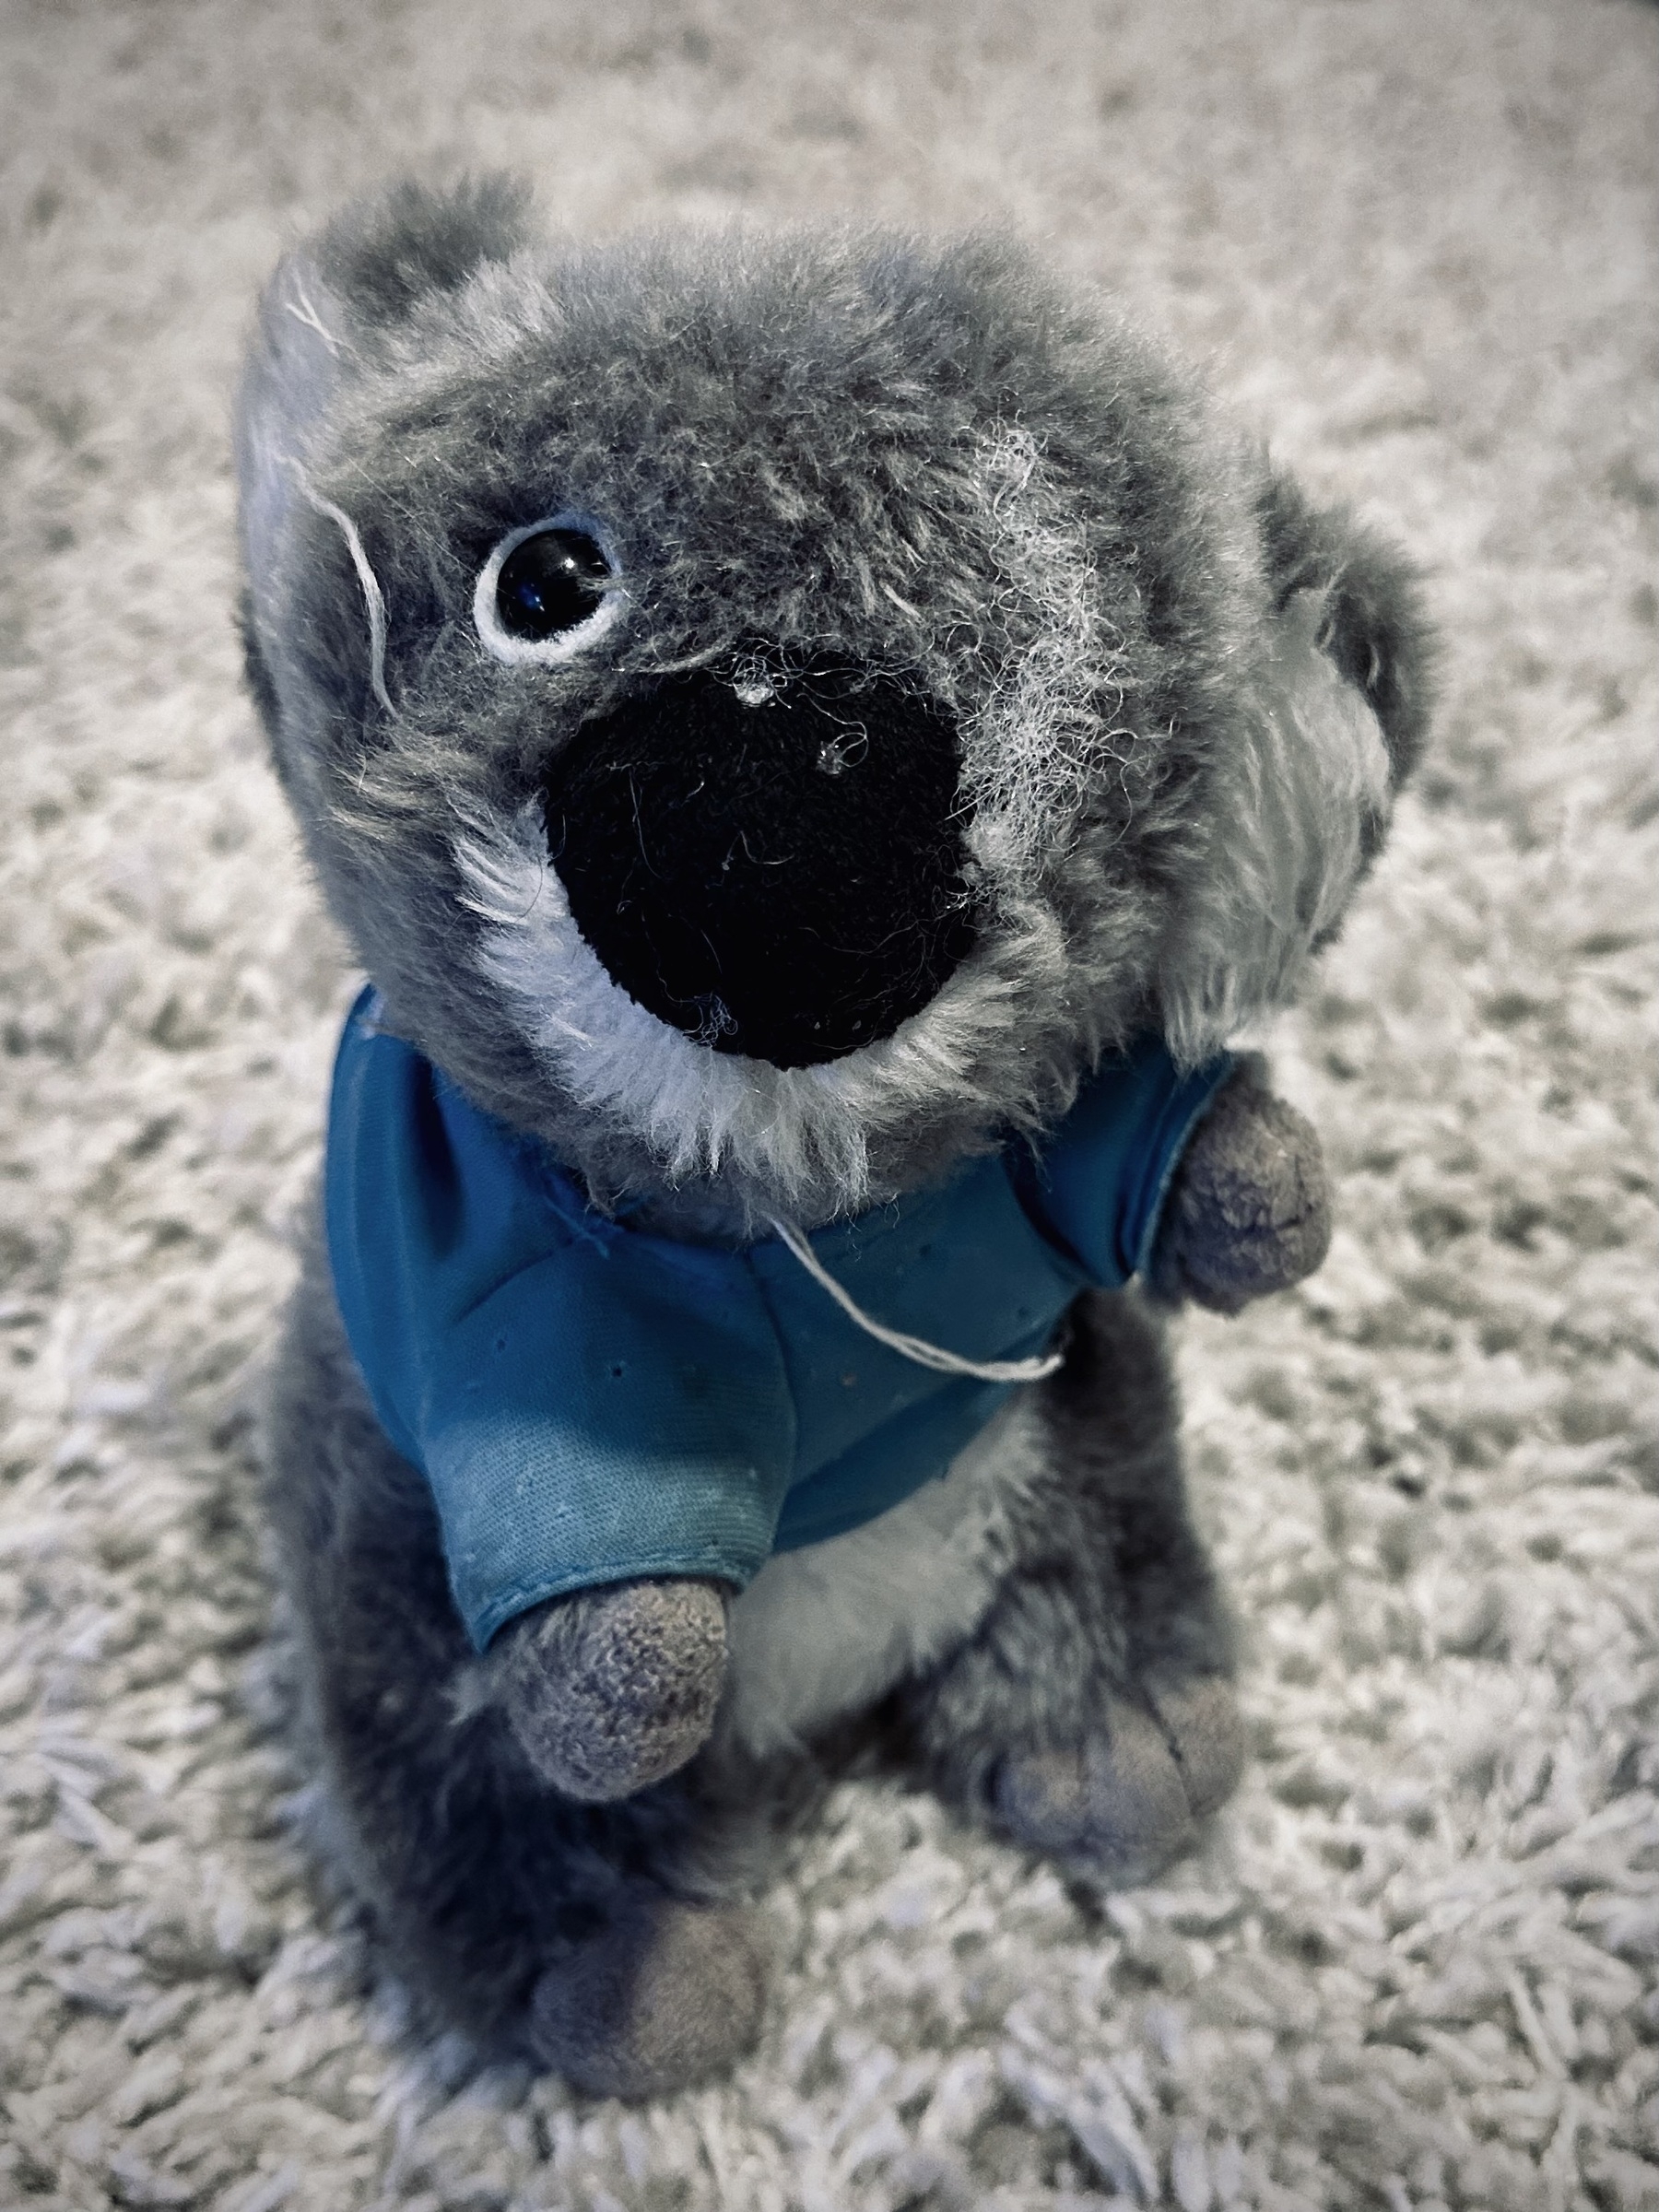 A close up of a plush koala wearing a blue t-shirt, full of holes, stuffing leaking out, an eye missing. Bruised and battered.